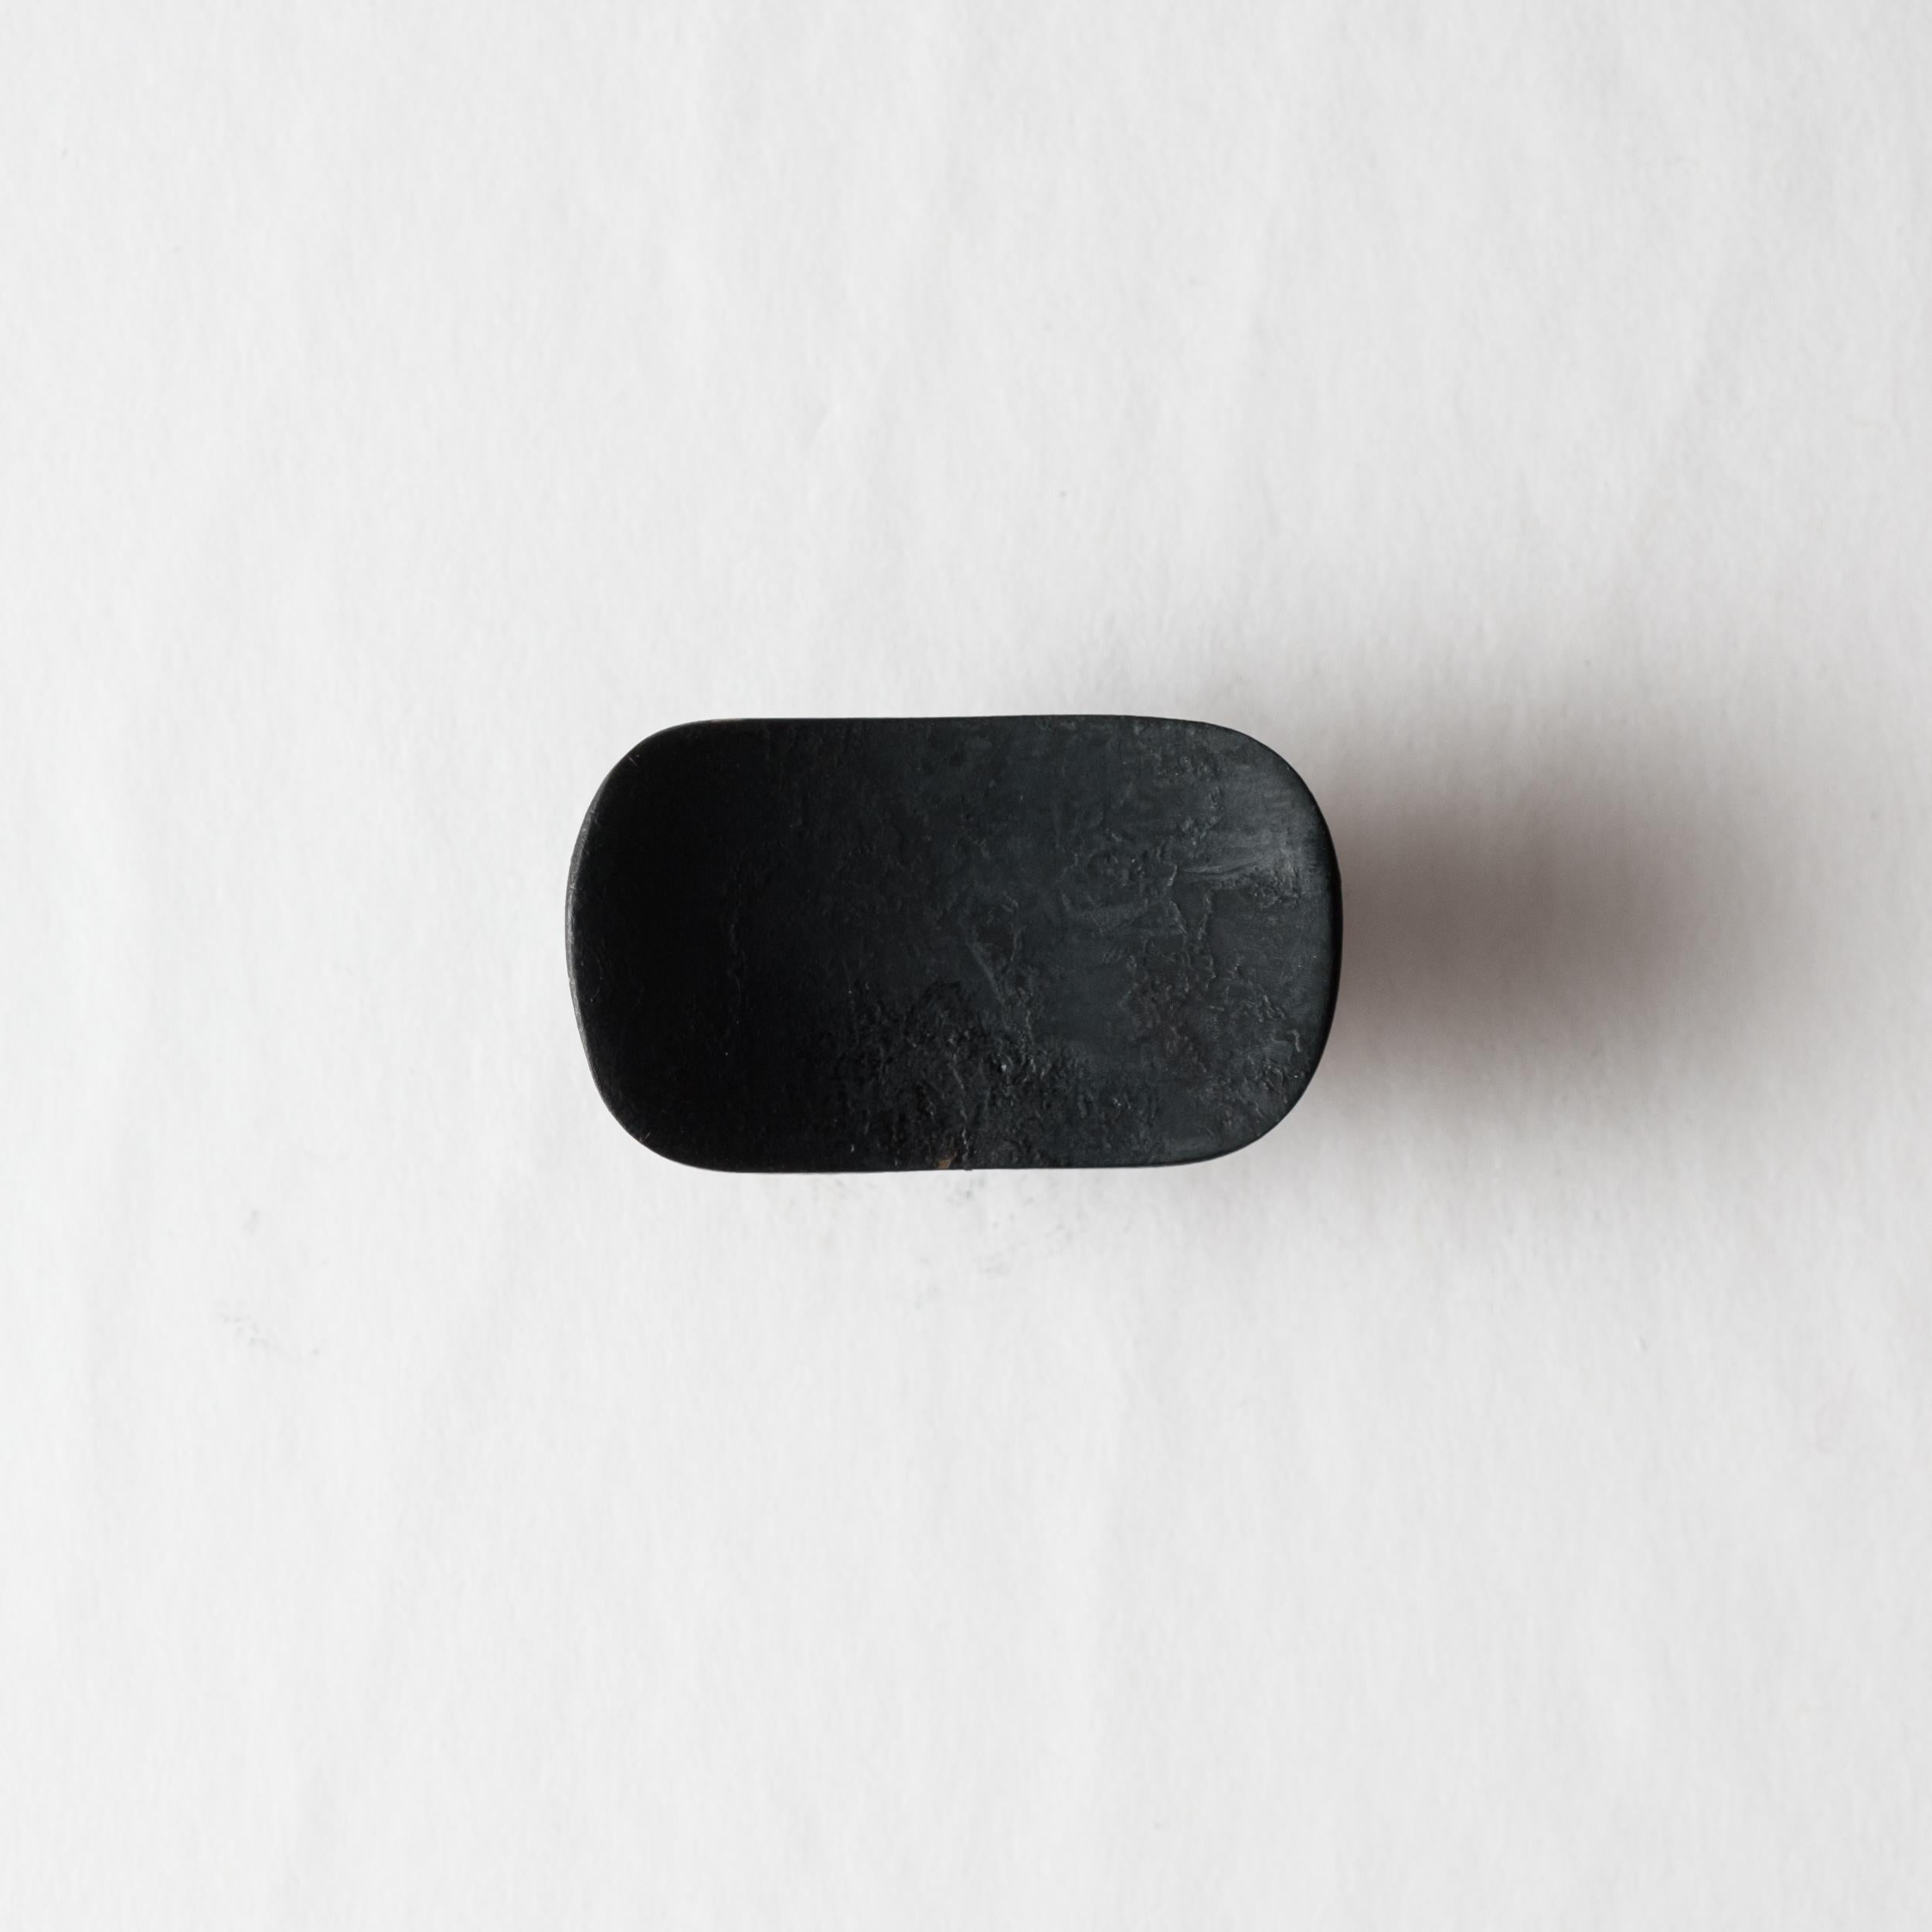 Carl Auböck Model #9038 patinated brass knob.

Designed in the 1950s, this versatile and Minimalist Viennese knob is executed in darkly patinated brass by Werkstätte Carl Auböck, Austria. Its minimalist design combines clean form with